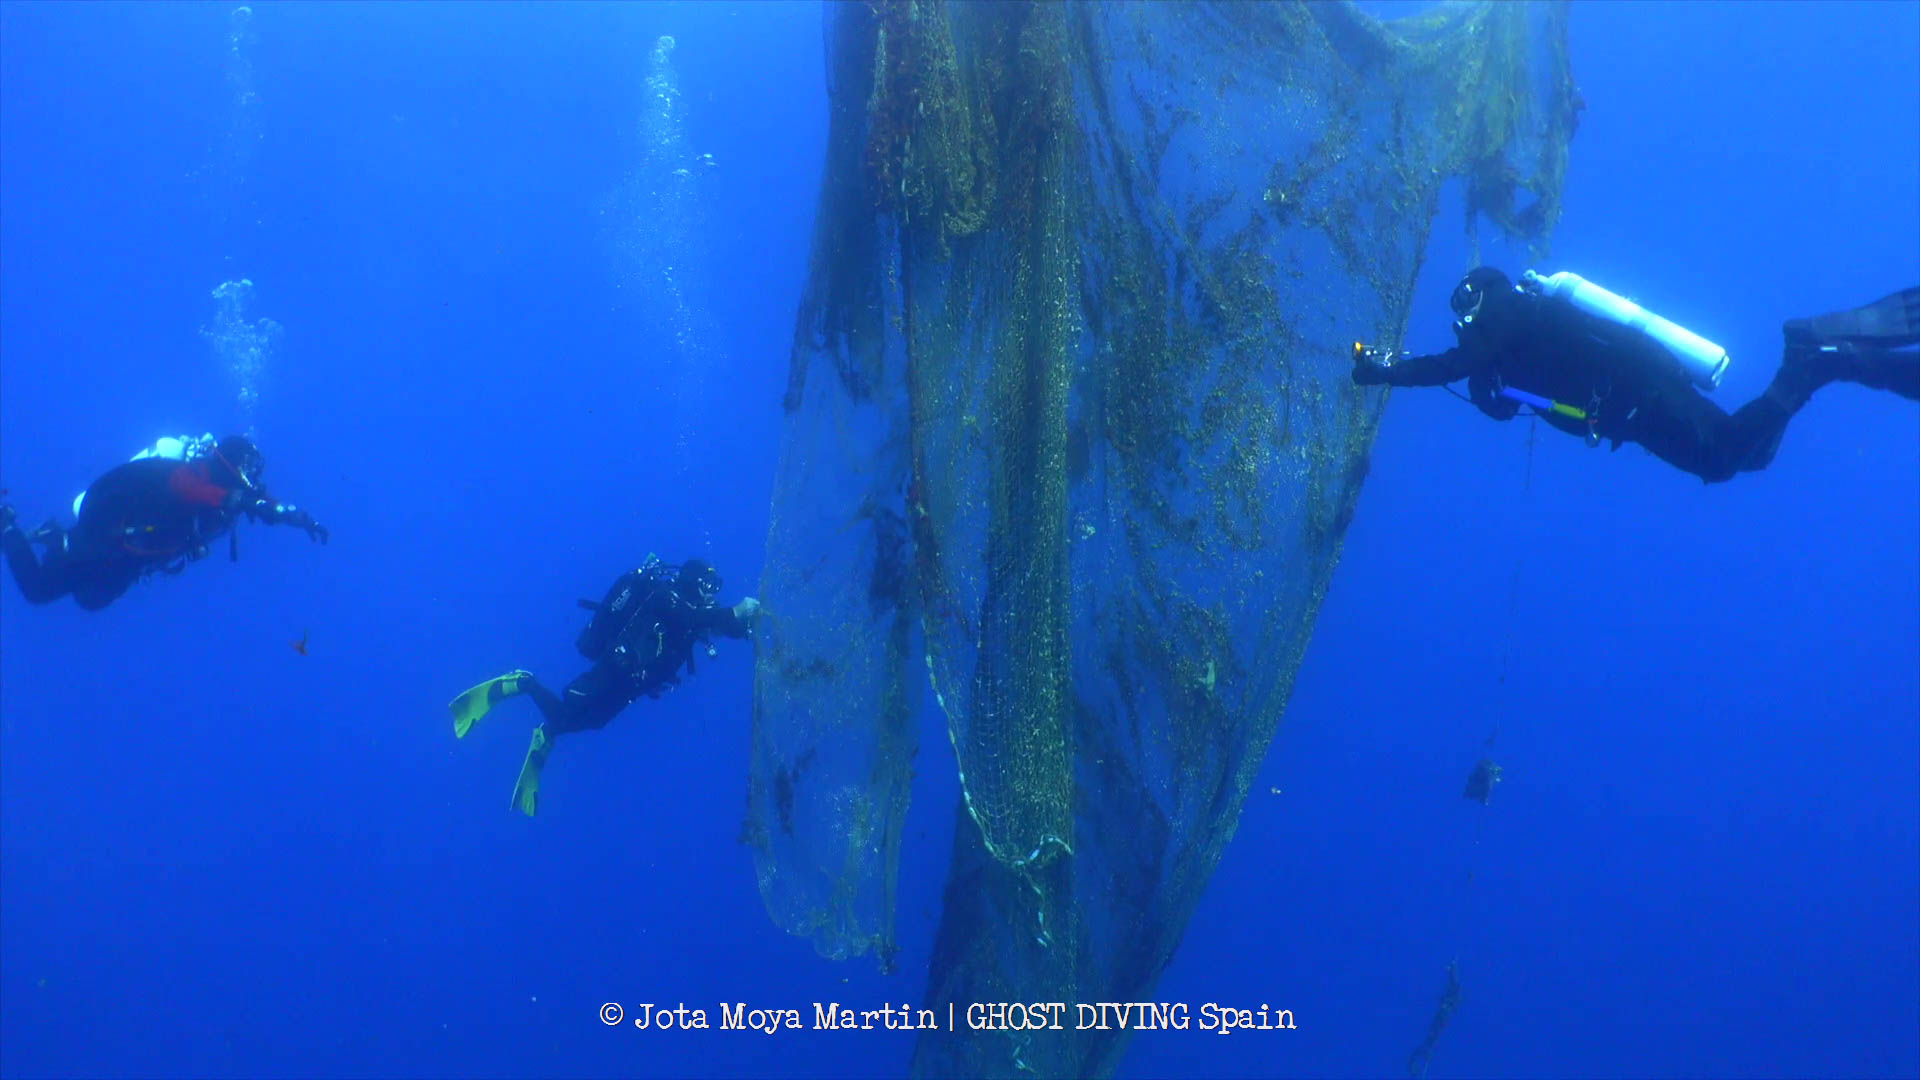 Press Release: Divers lift fishing net weighing 450 kgs from reef